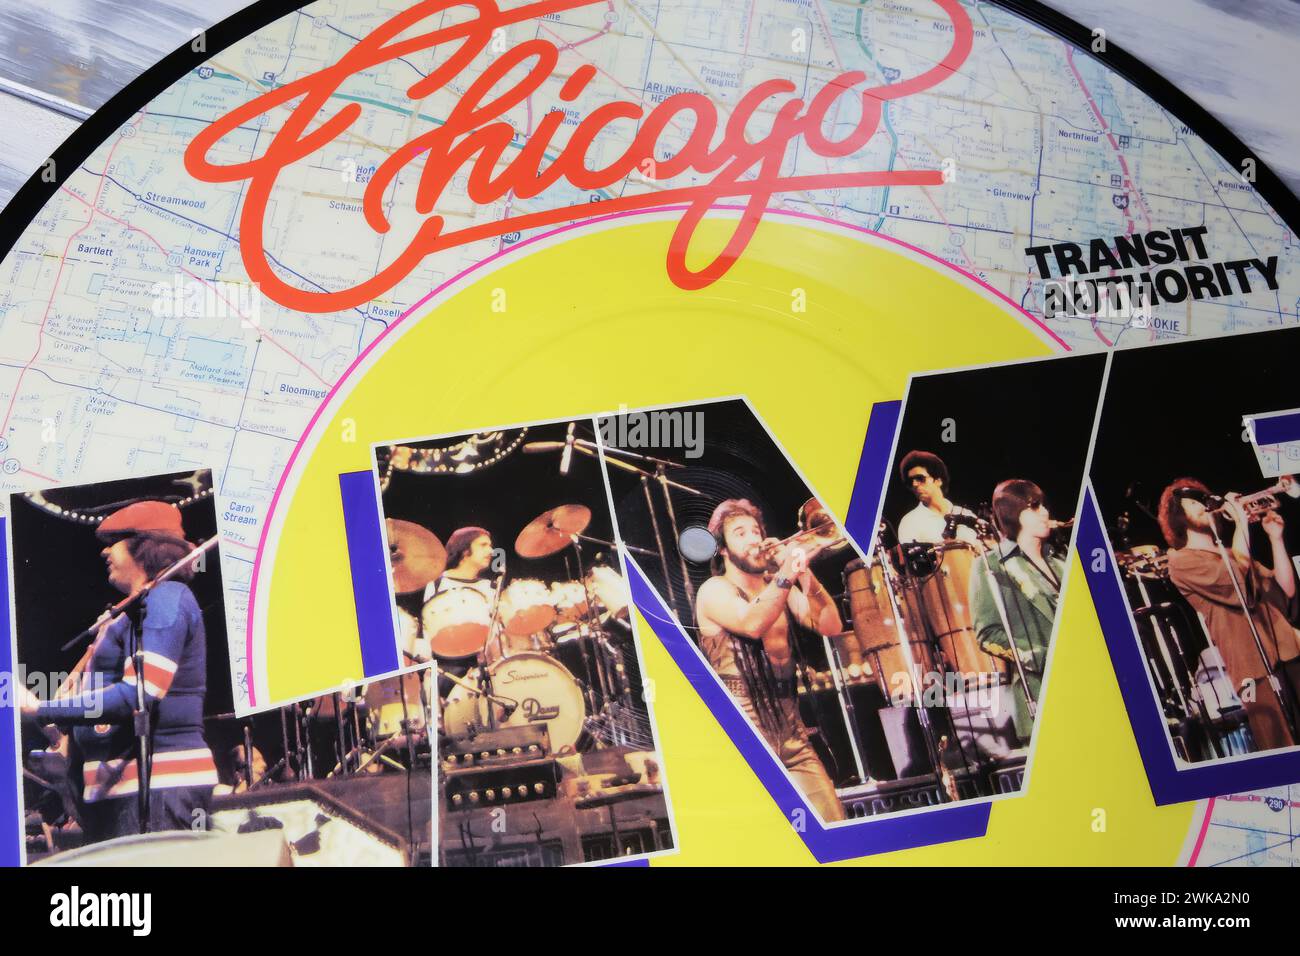 Viersen, Germany - January 9. 2024: Closeup of vinyl record album cover live picture disc Transit Authority from 1971 Stock Photo